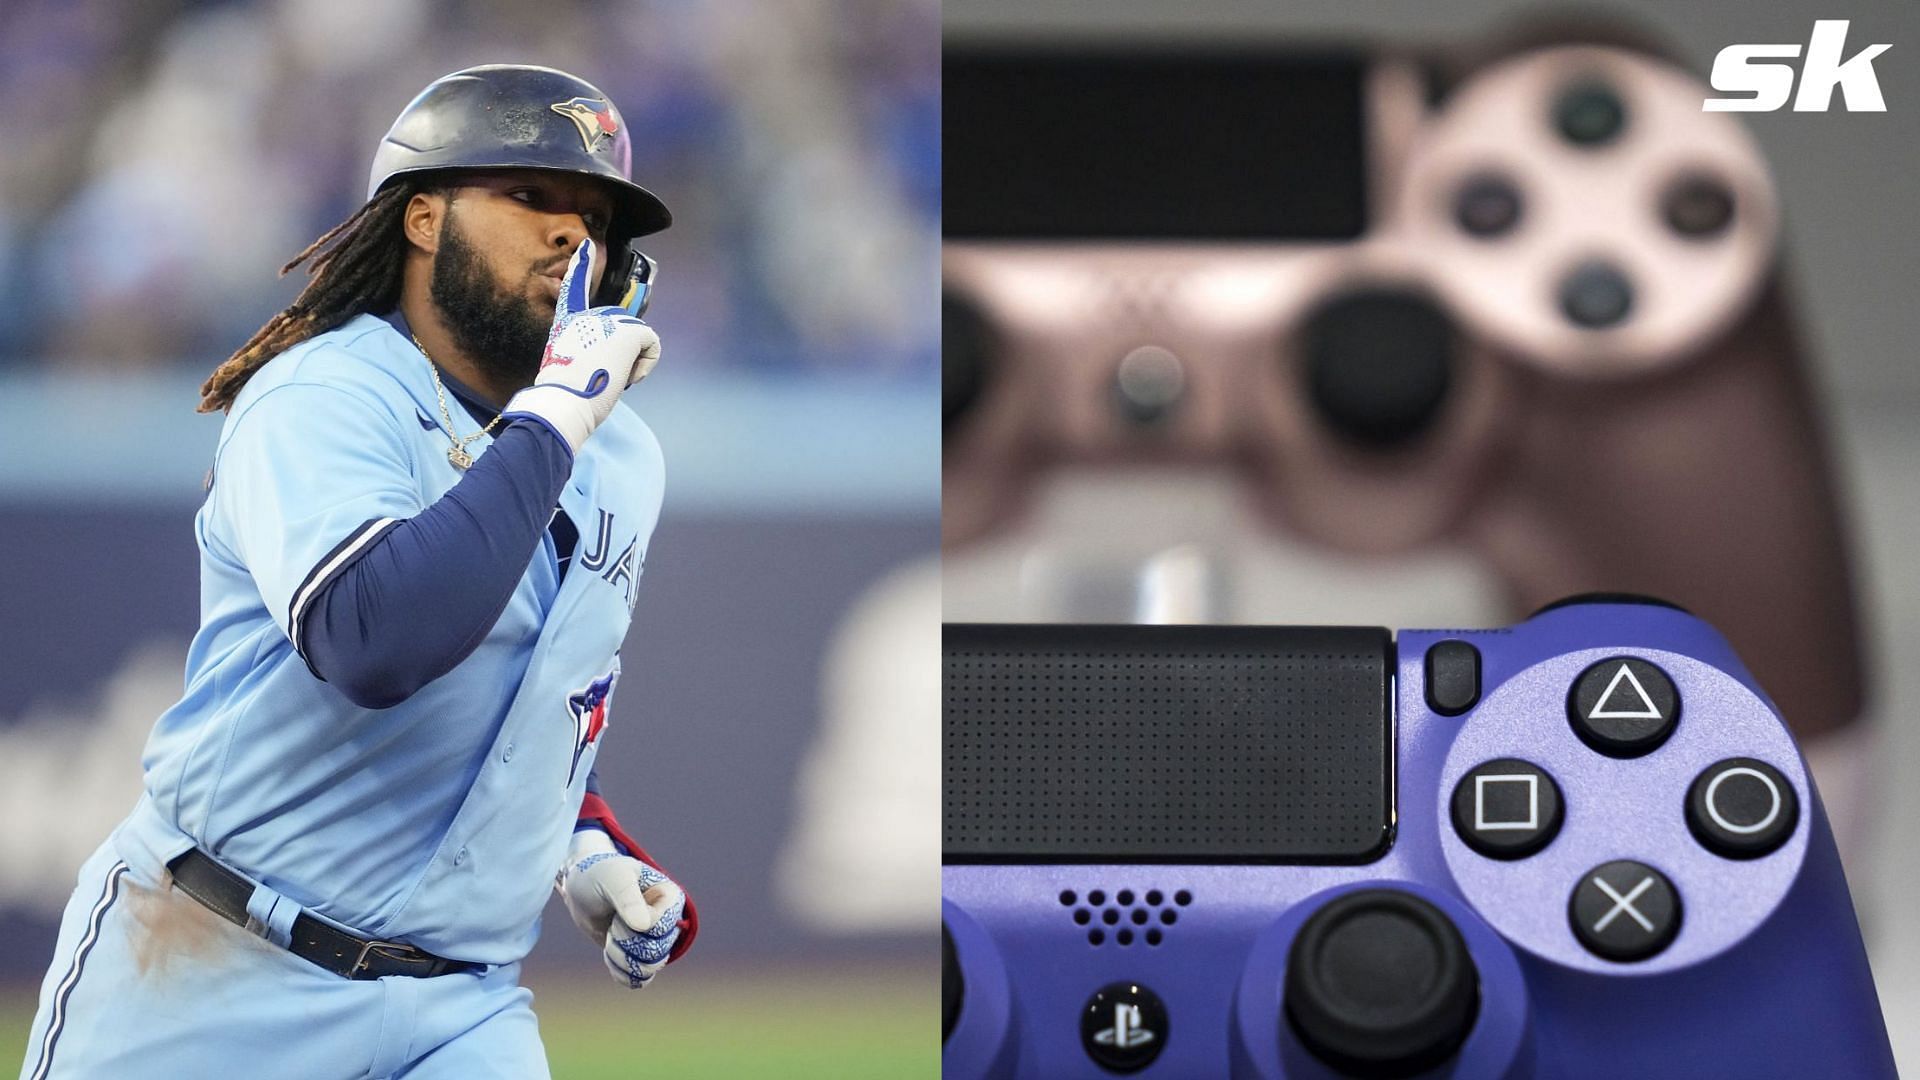 Latest update of MLB The Show 24 allegedly gave gamers access to Real 99 players for the first time ever